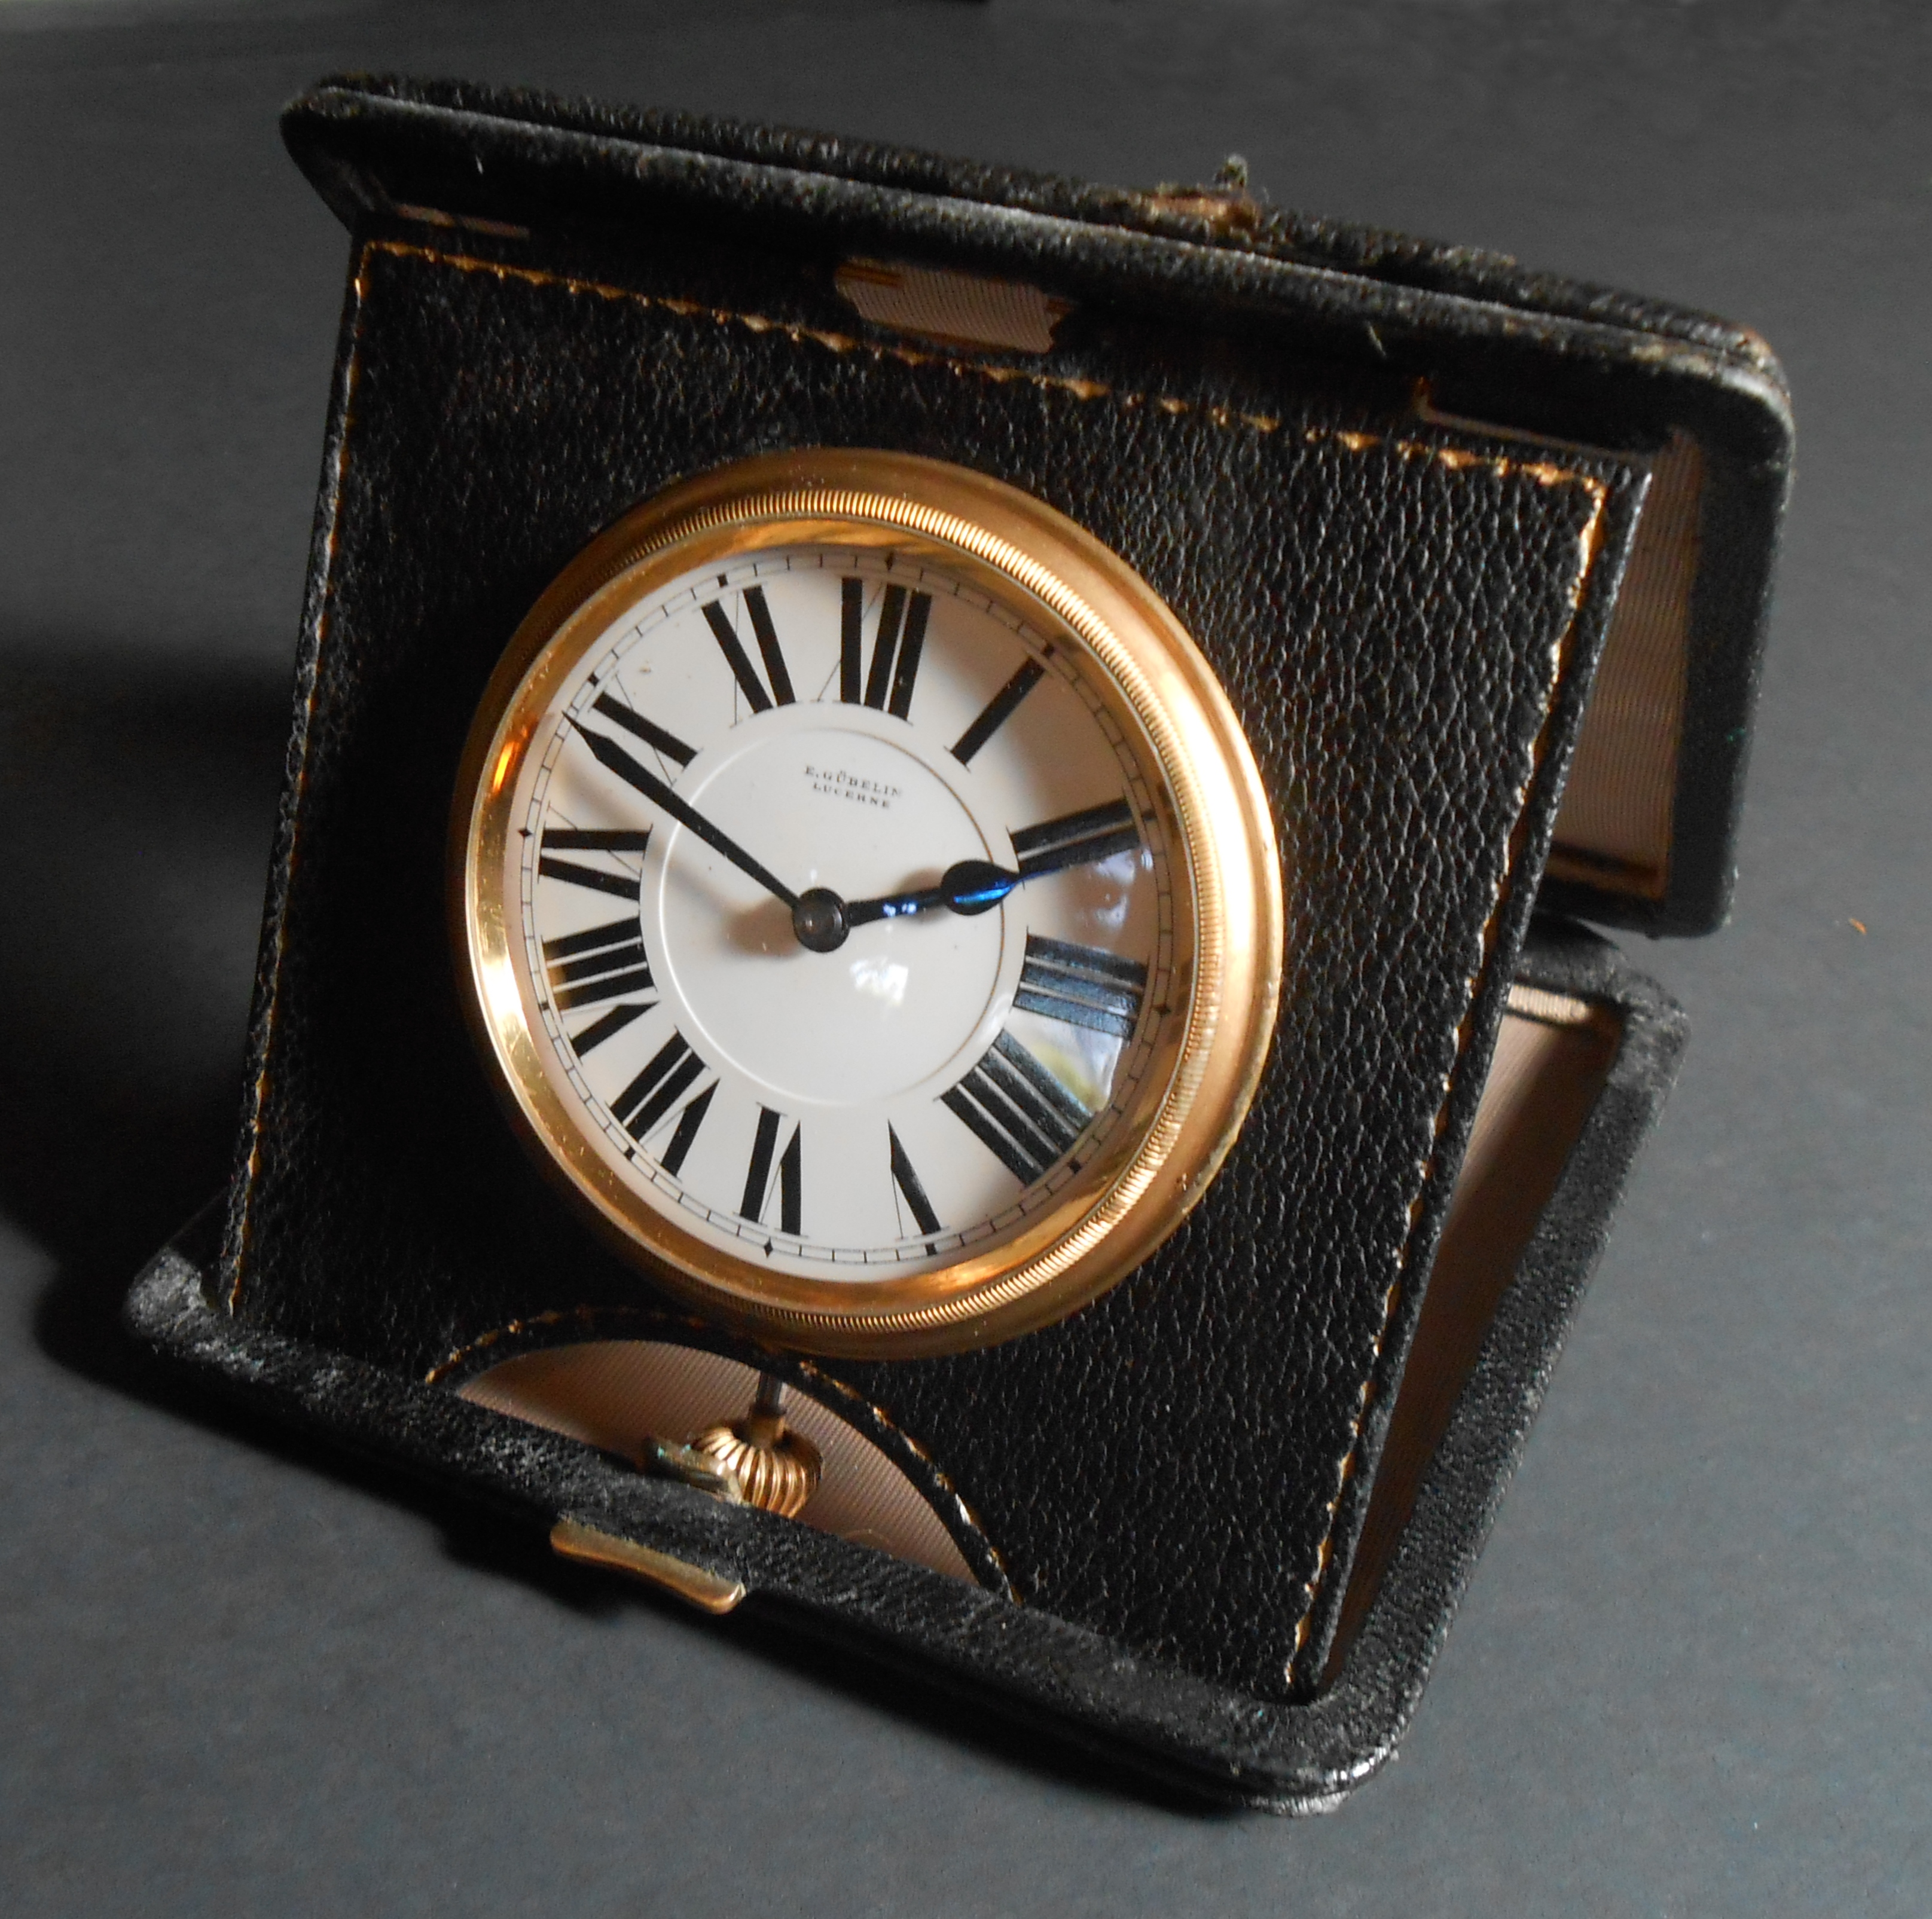 Octava movement High end travel clock by Gubelin circa 1920 | Once upon a  time